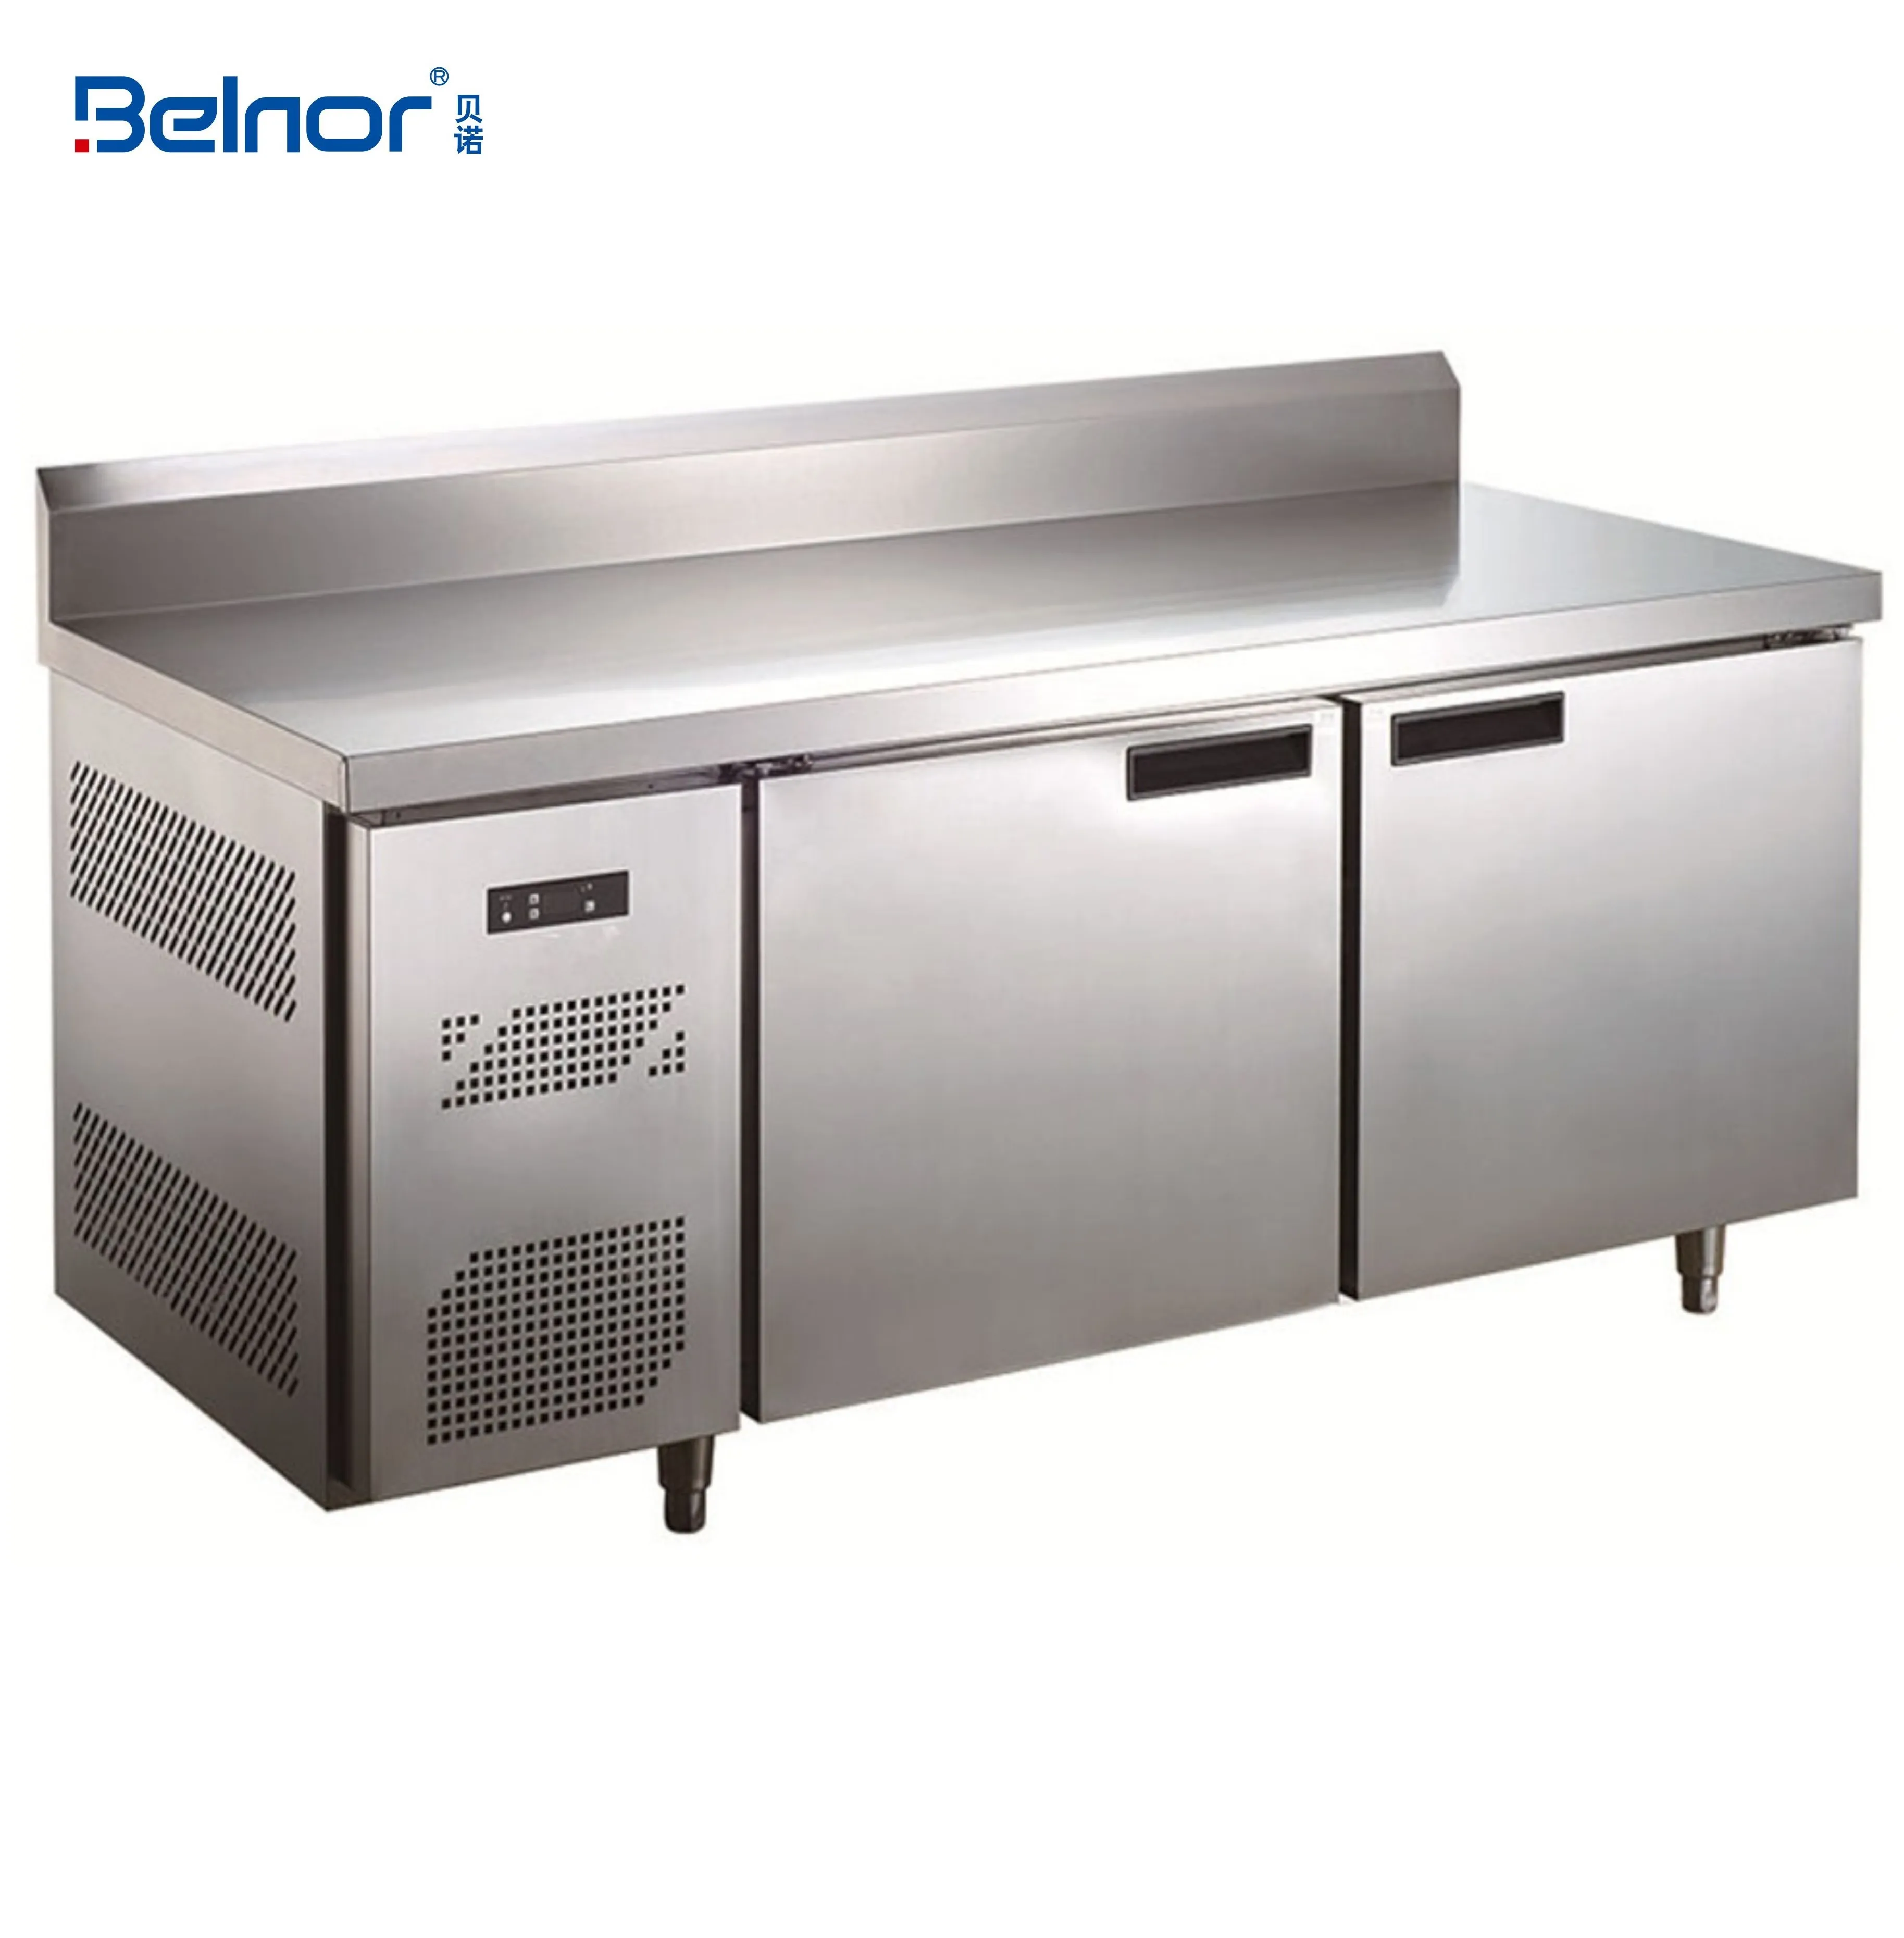 Hotel Used Stainless Steel Table Top Refrigerator Buy Workbench